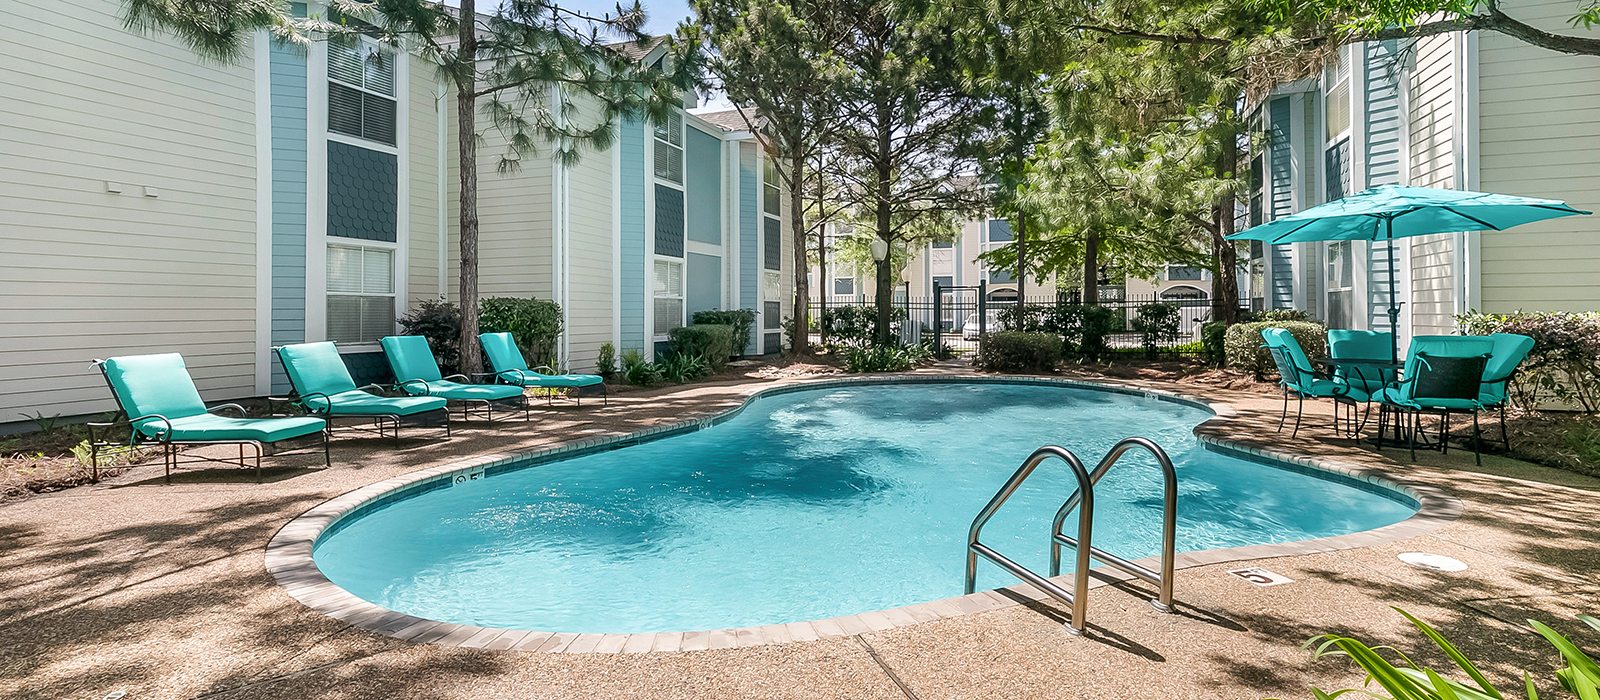 Pelican Bay Apartments reviews | 2150 42nd St. - Kenner LA